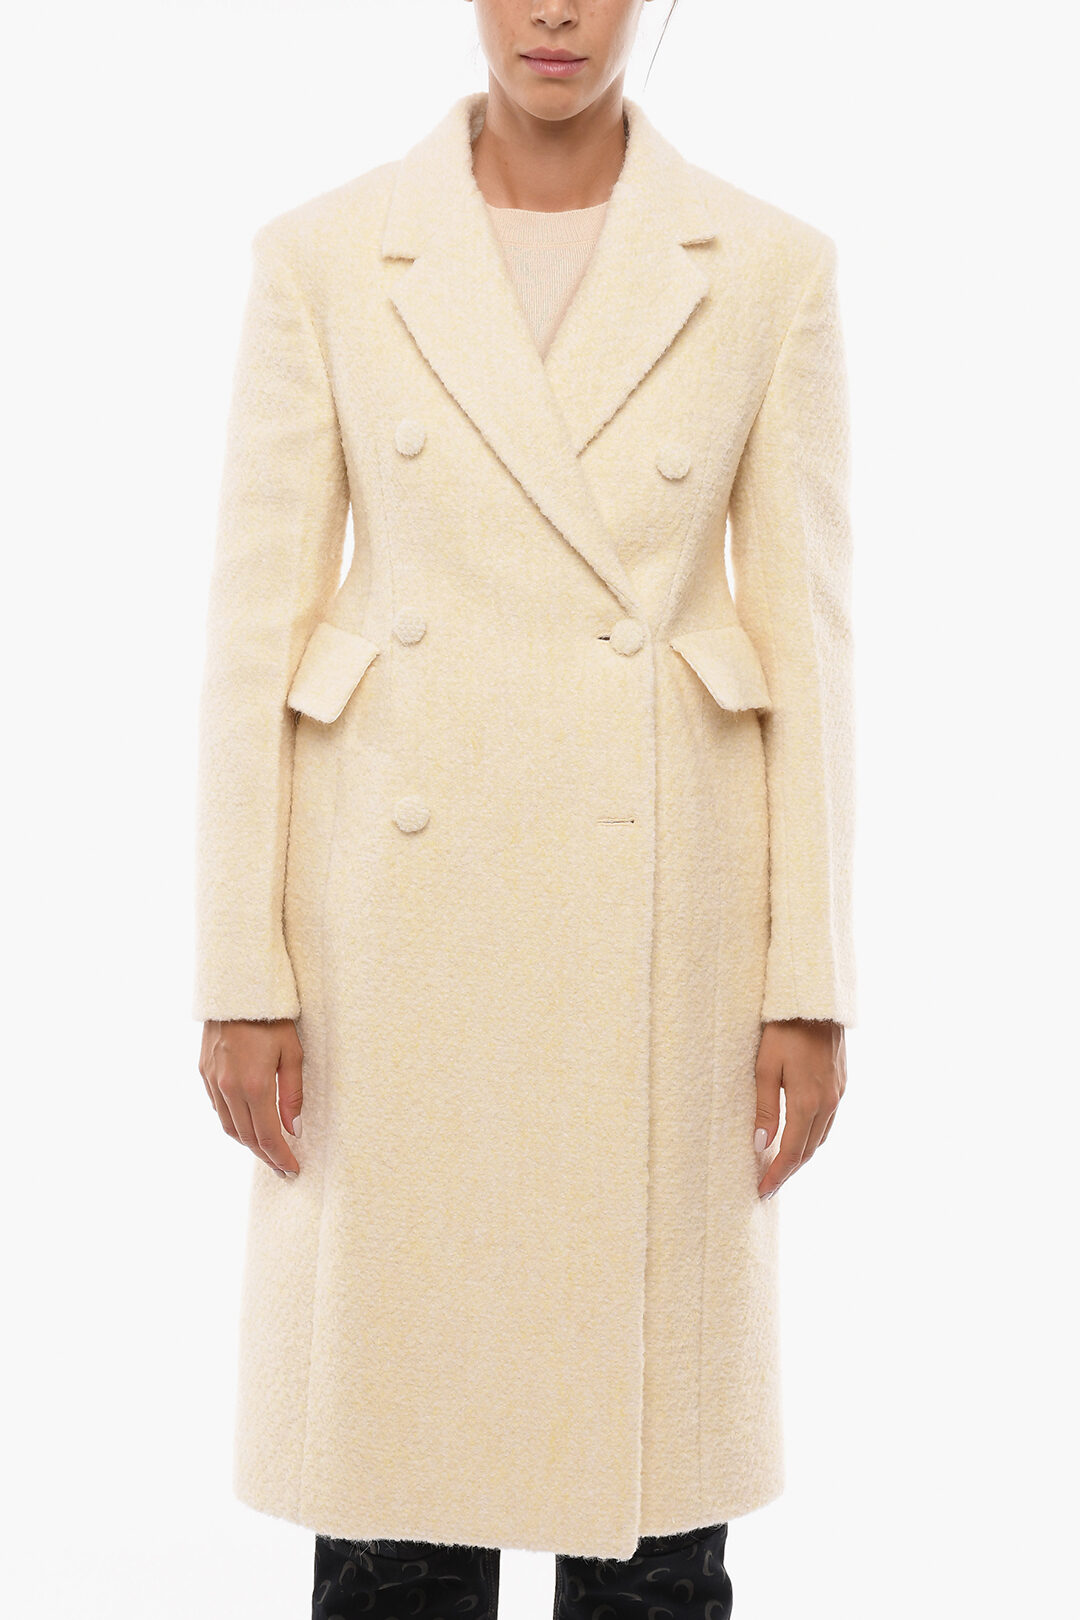 Jil Sander Wool Double-breasted Coat with Flap Pockets women - Glamood  Outlet